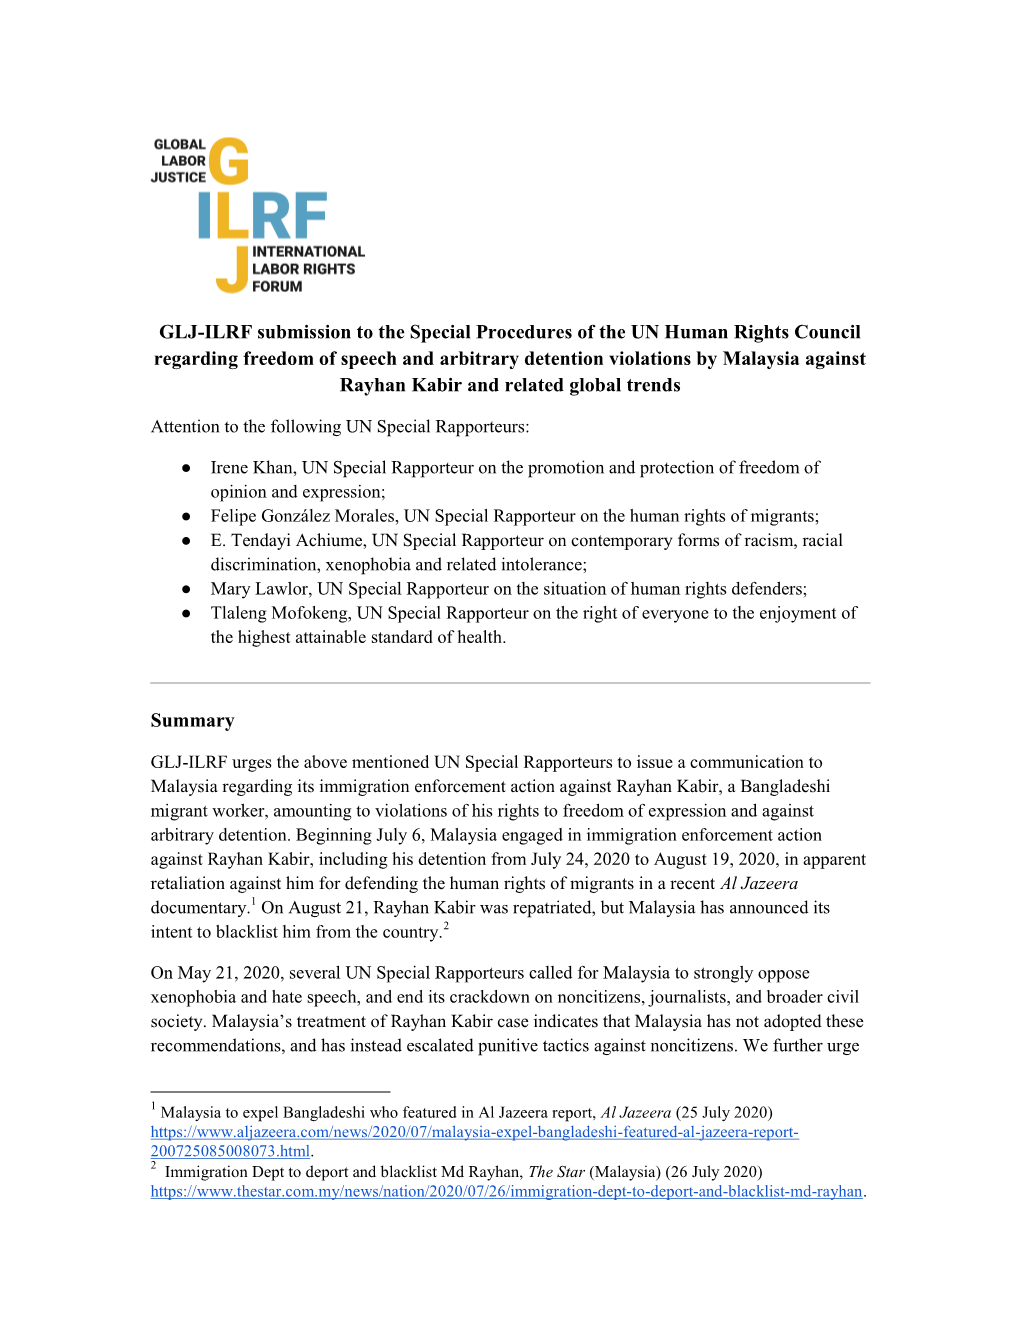 GLJ-ILRF Submission to the Special Procedures of the UN Human